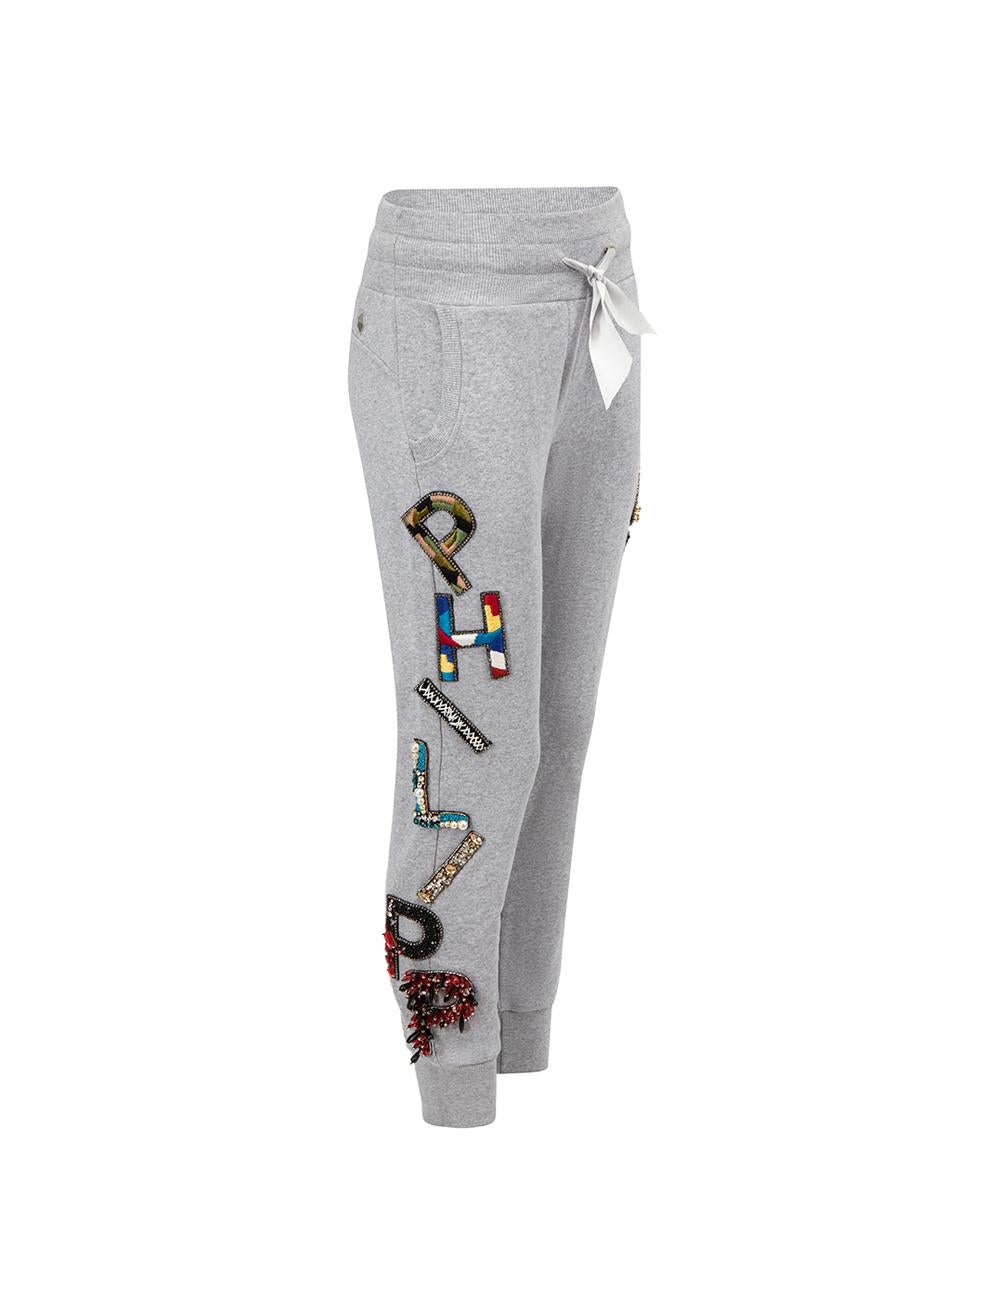 CONDITION is Very good. Minimal wear to trousers is evident. Minor loose threads to patches on this used Philipp Plein designer resale item.



Details


Limited edition

Grey

Cotton

Joggers

Multicoloured 'Philipp Plein 87' patches

Elasticated